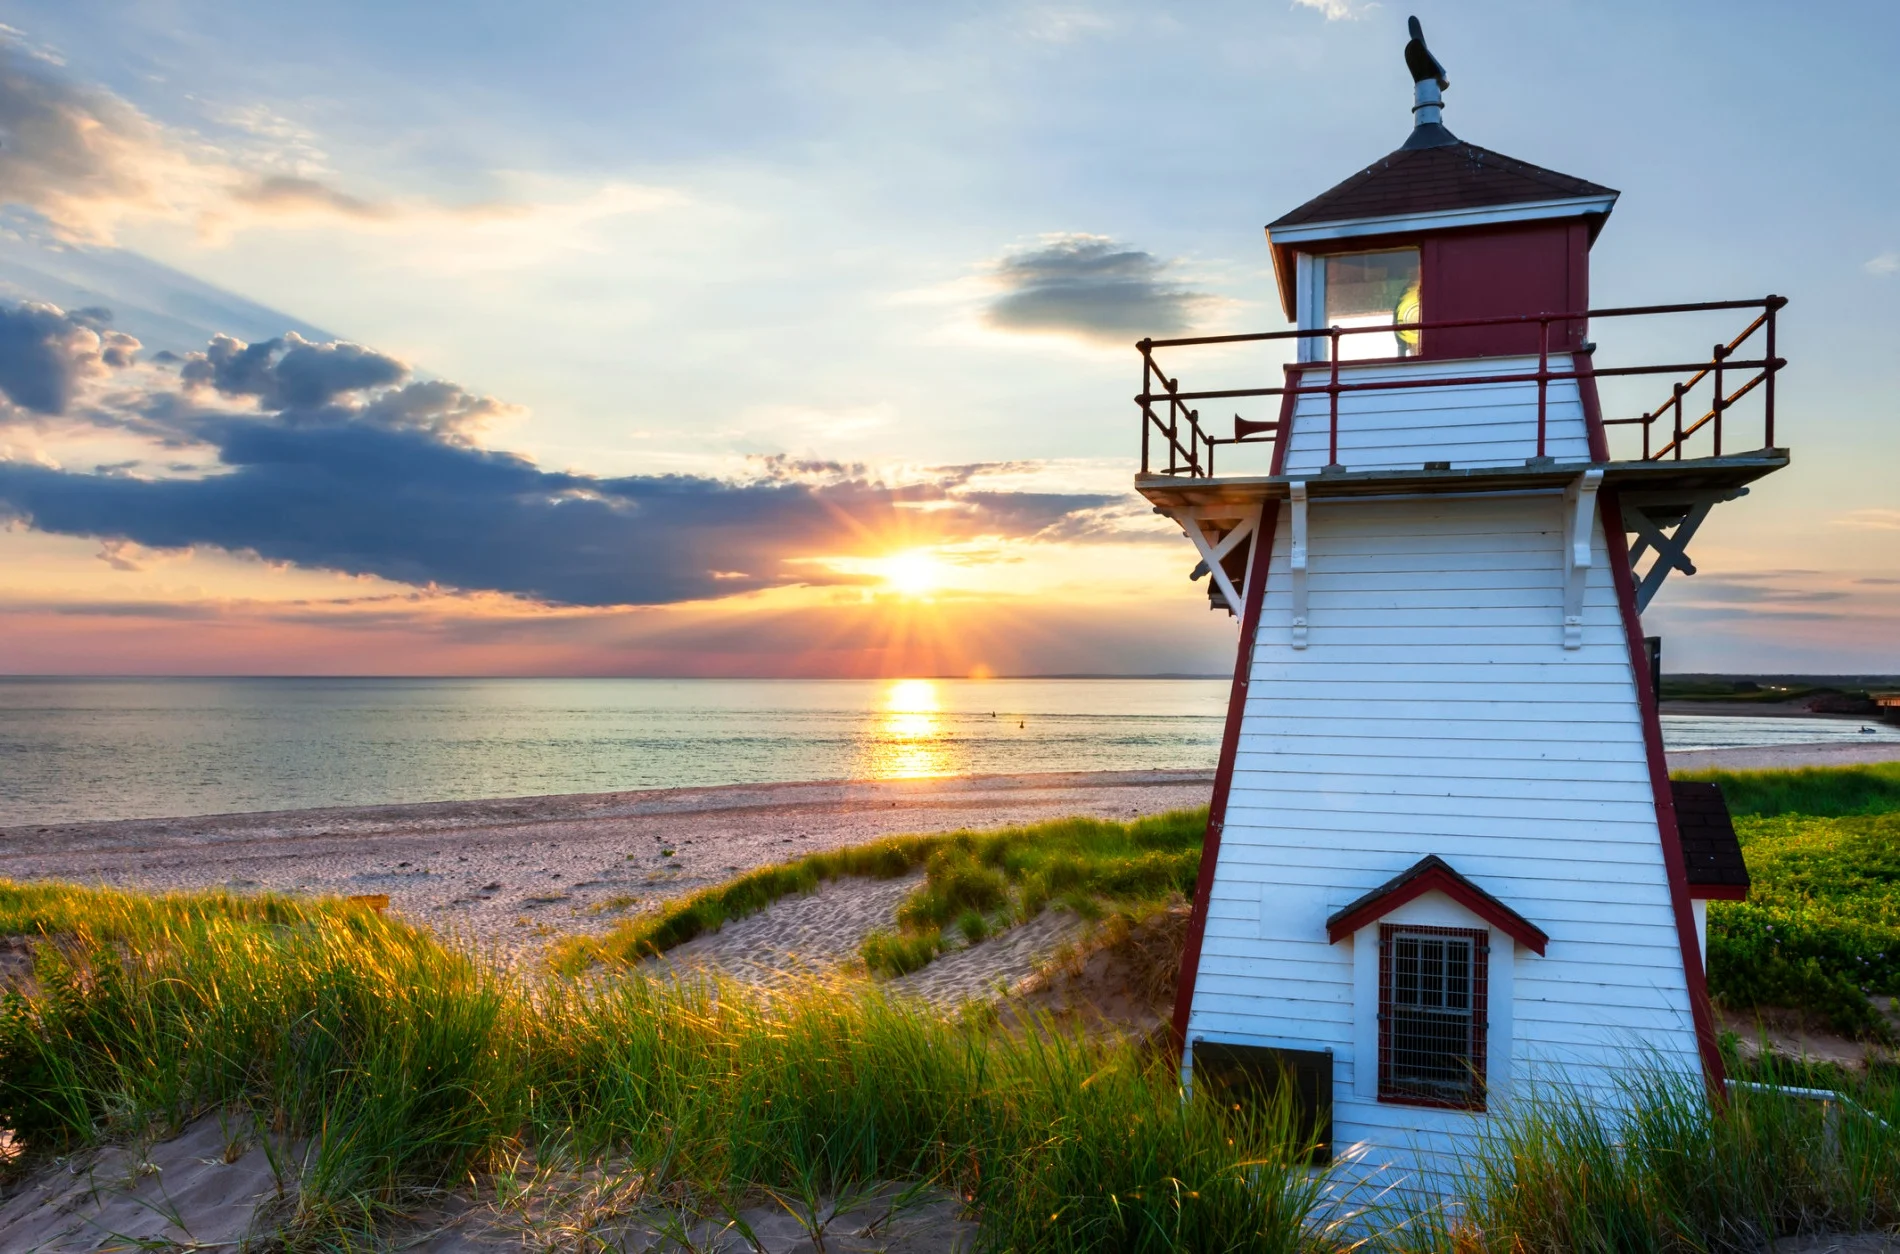 P.E.I.'s iconic lighthouses are on the edge of rising sea levels